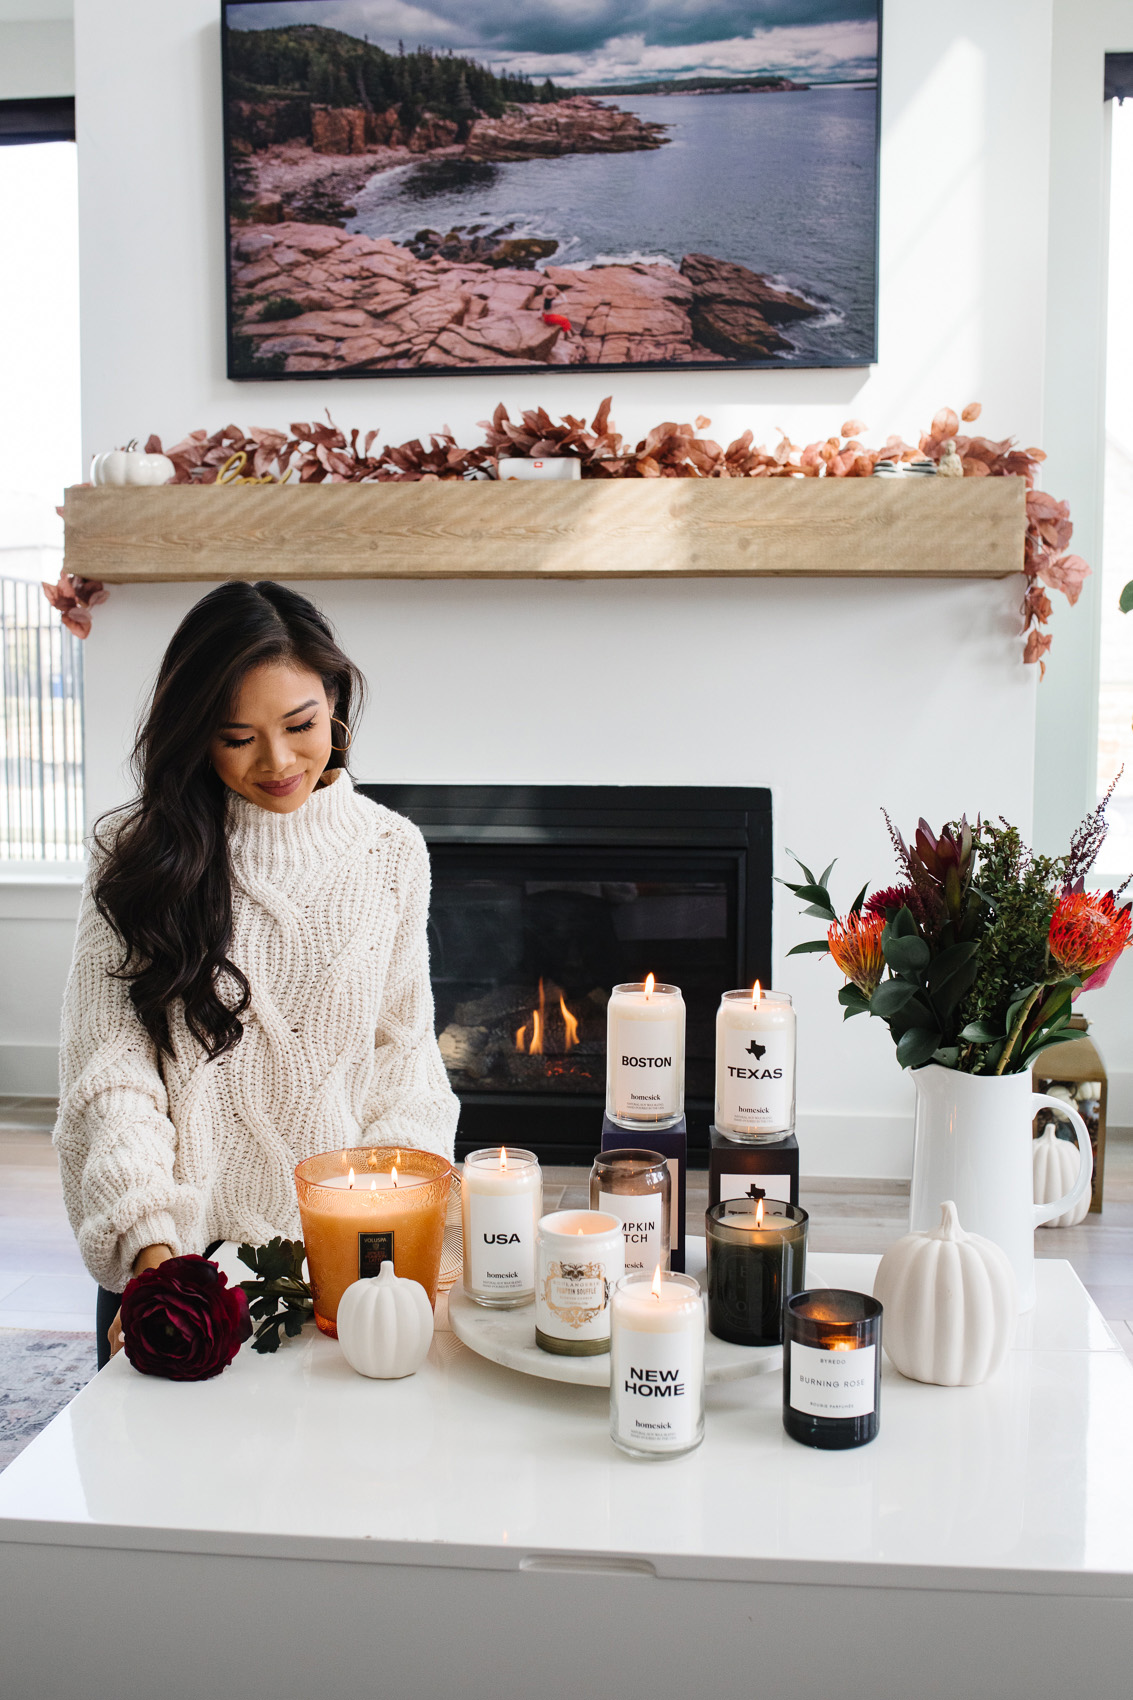 Blogger Hoang-Kim sharing her favorite luxury candles in front of her fireplace with Homesick candles, Voluspa spiced pumpkin latte, Diptyque feu de bois and more